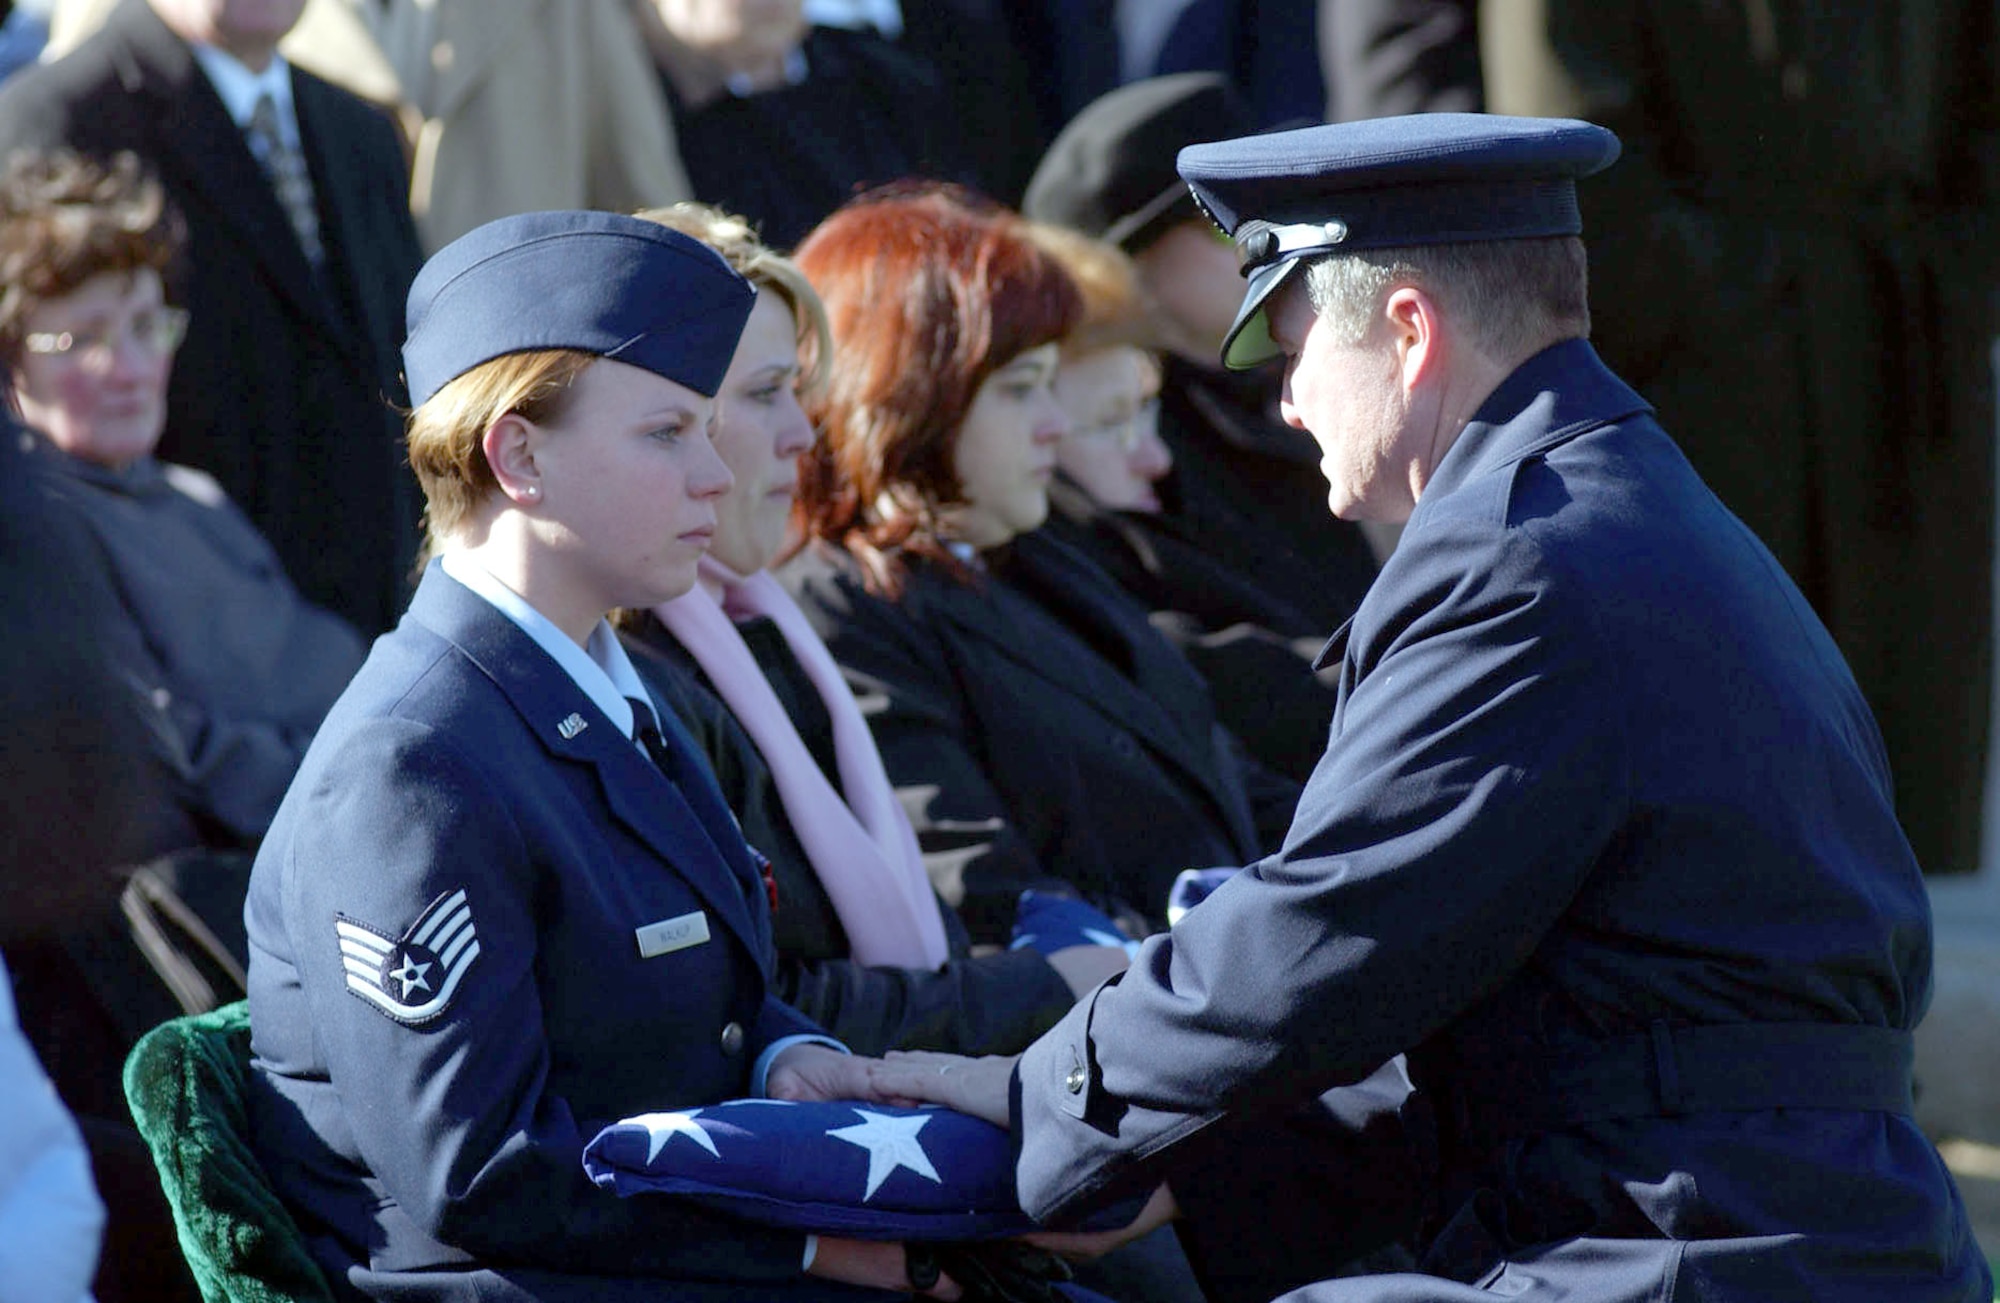 ARLINGTON, Va. -- Chief Master Sgt. of the Air Force Gerald R. Murray presents a flag to Staff Sgt. Carrissa Walkup during a full-honor mass funeral at Arlington National Cemetery.  Her husband, Staff Sgt. Thomas A. Walkup Jr., and four other military members were killed when their MH-53M Pave Low helicopter crashed Nov. 23 in Afghanistan. (U.S. Air Force photo by Staff Sgt. Jennifer Gangemi)